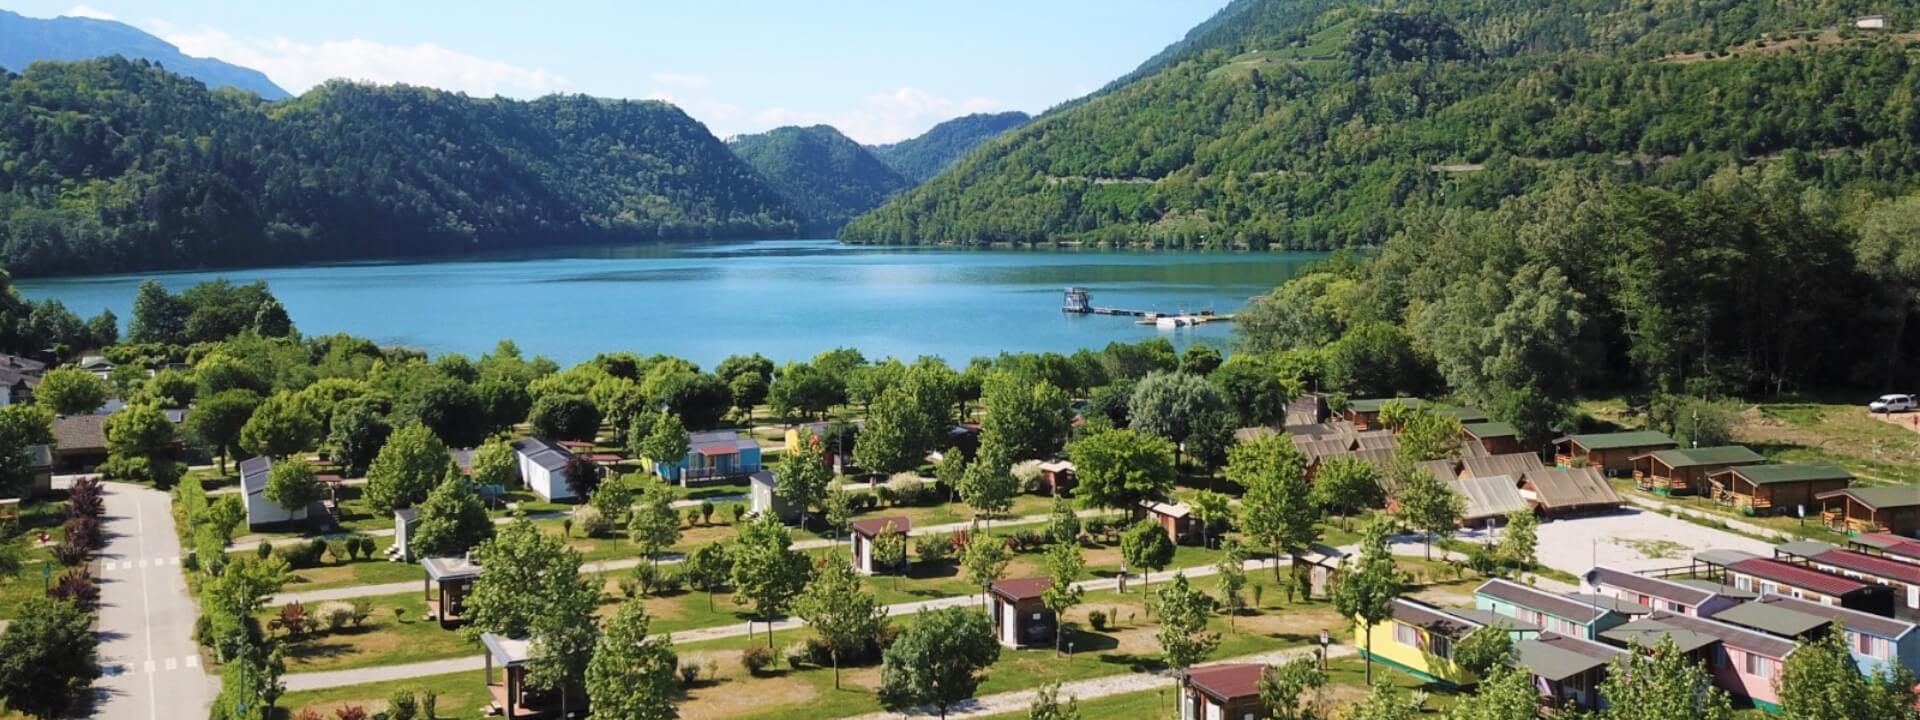 campinglevico en june-offer-lake-levico-camping-with-swimming-pool-and-private-beach 005